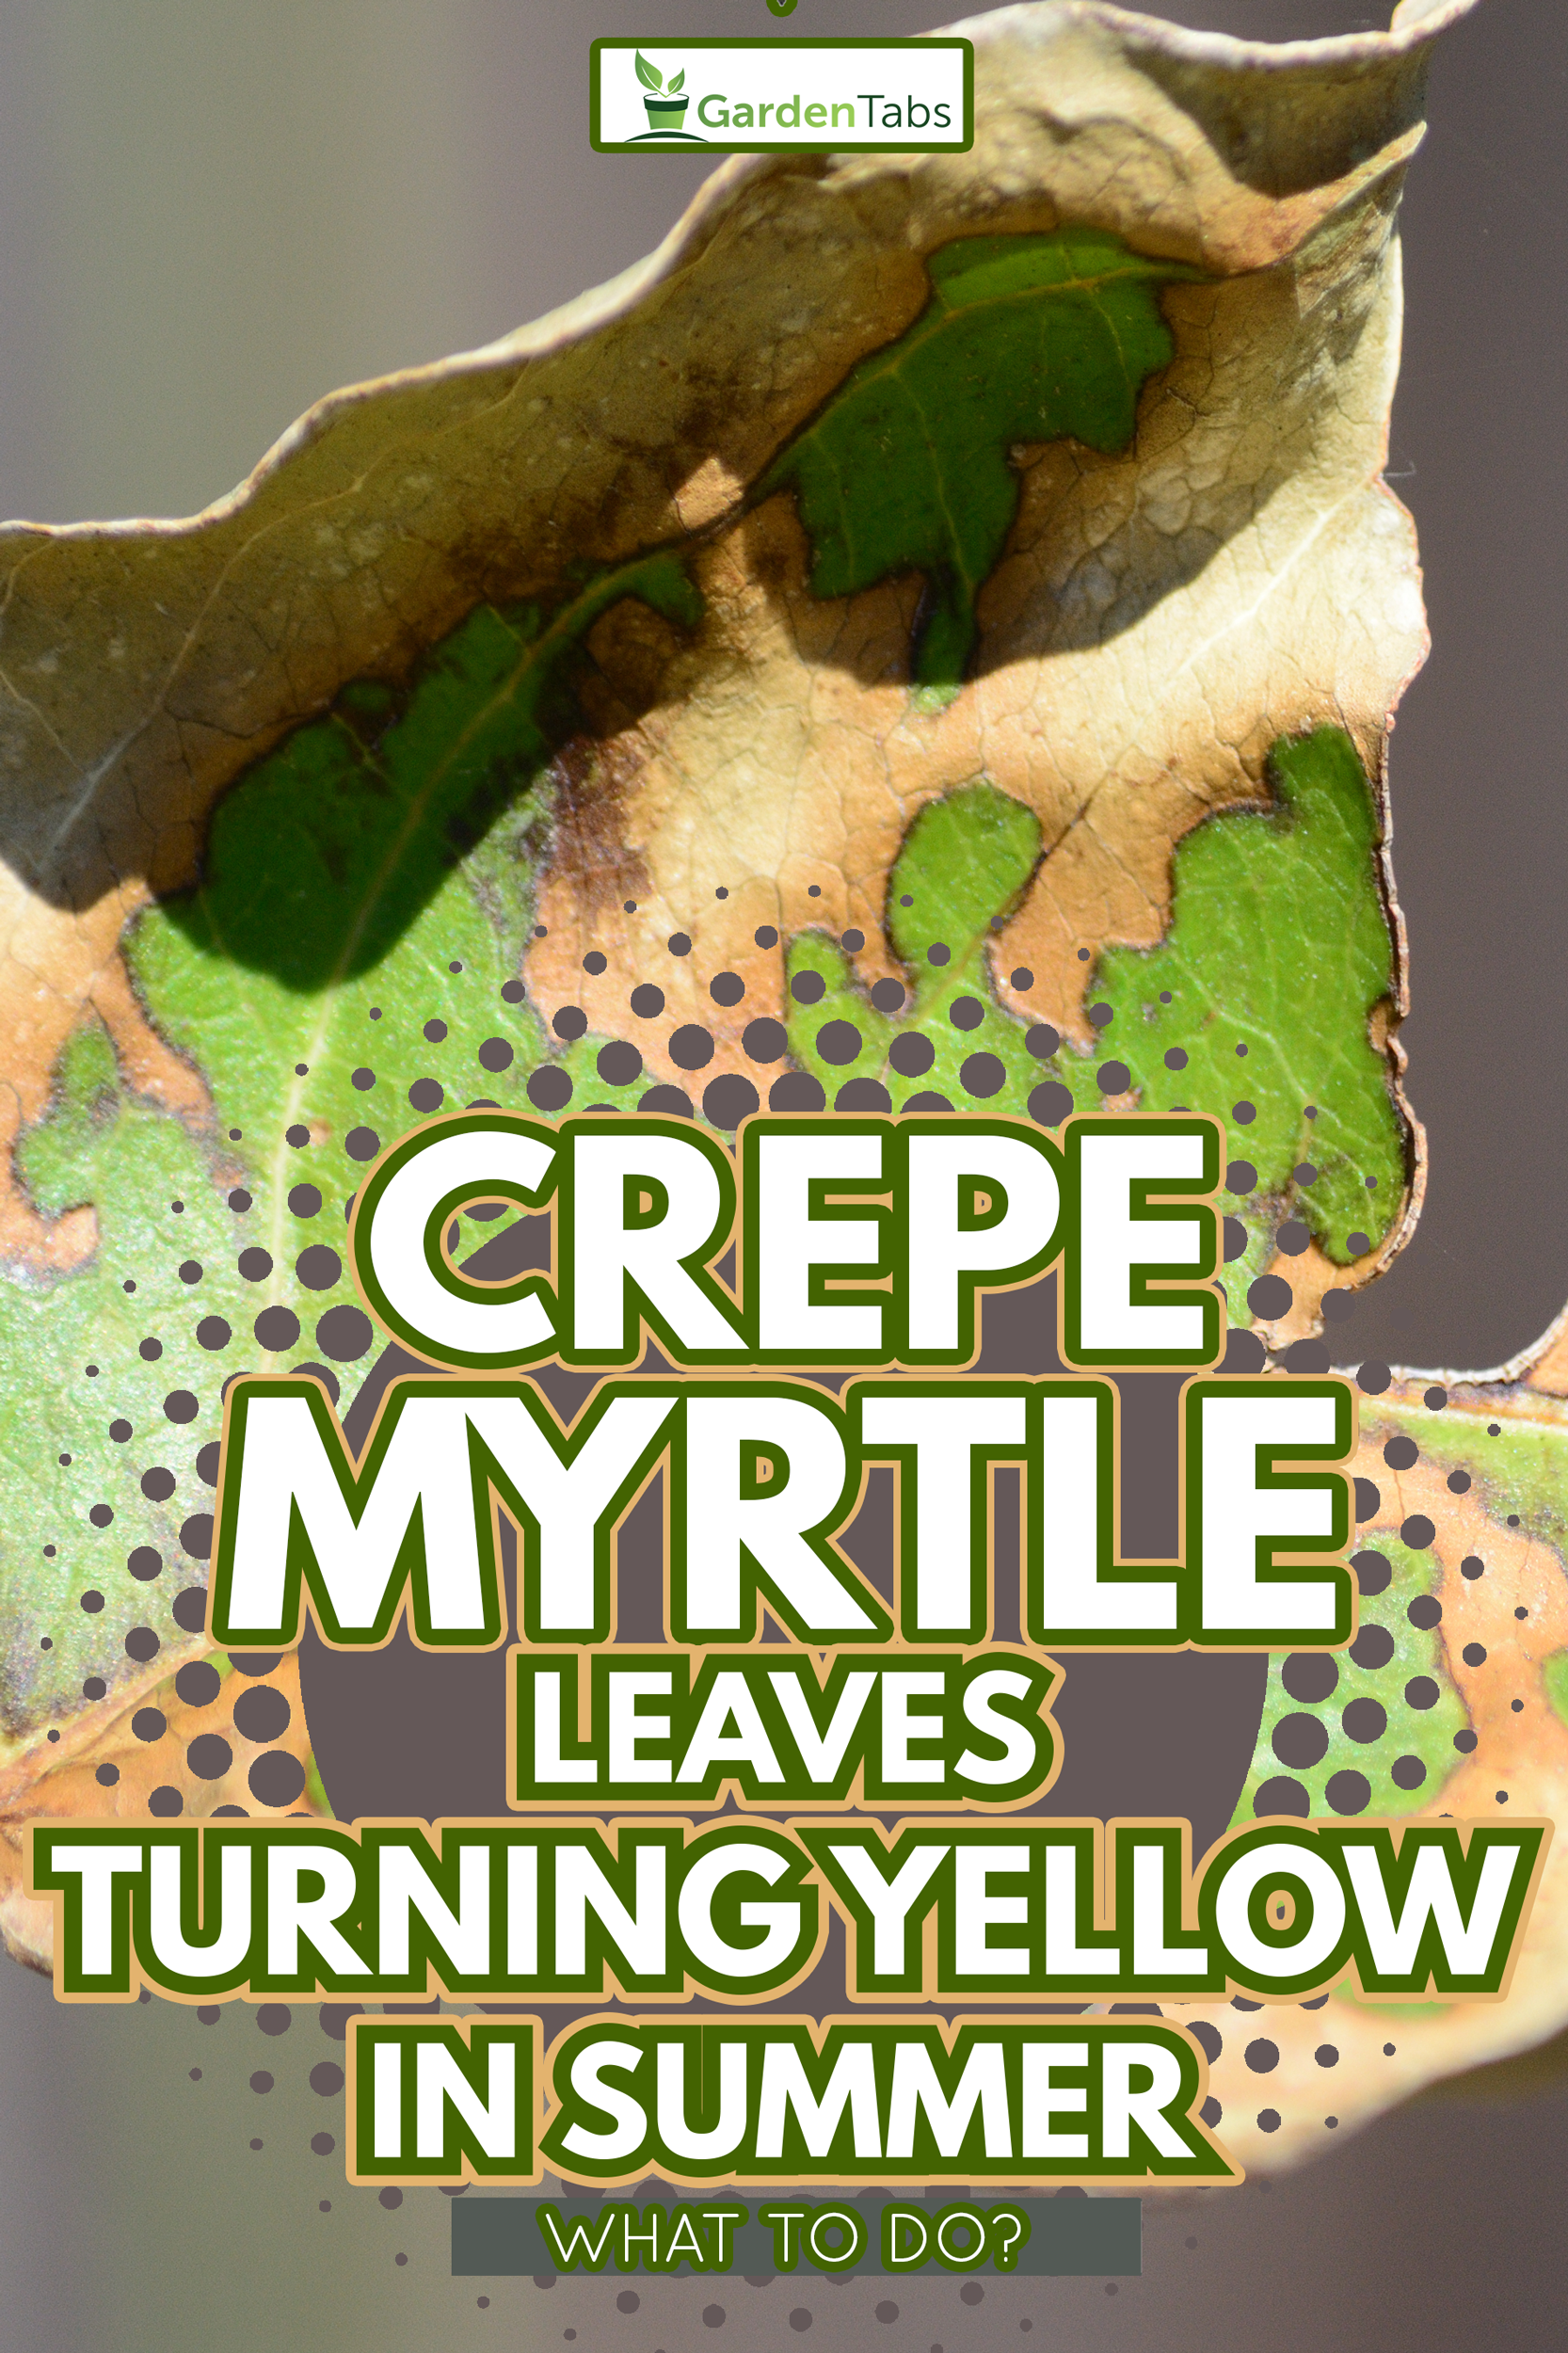 Dying crepe myrtle leaf with single spider web spun across gap - Crepe Myrtle Leaves Turning Yellow In Summer - What To Do